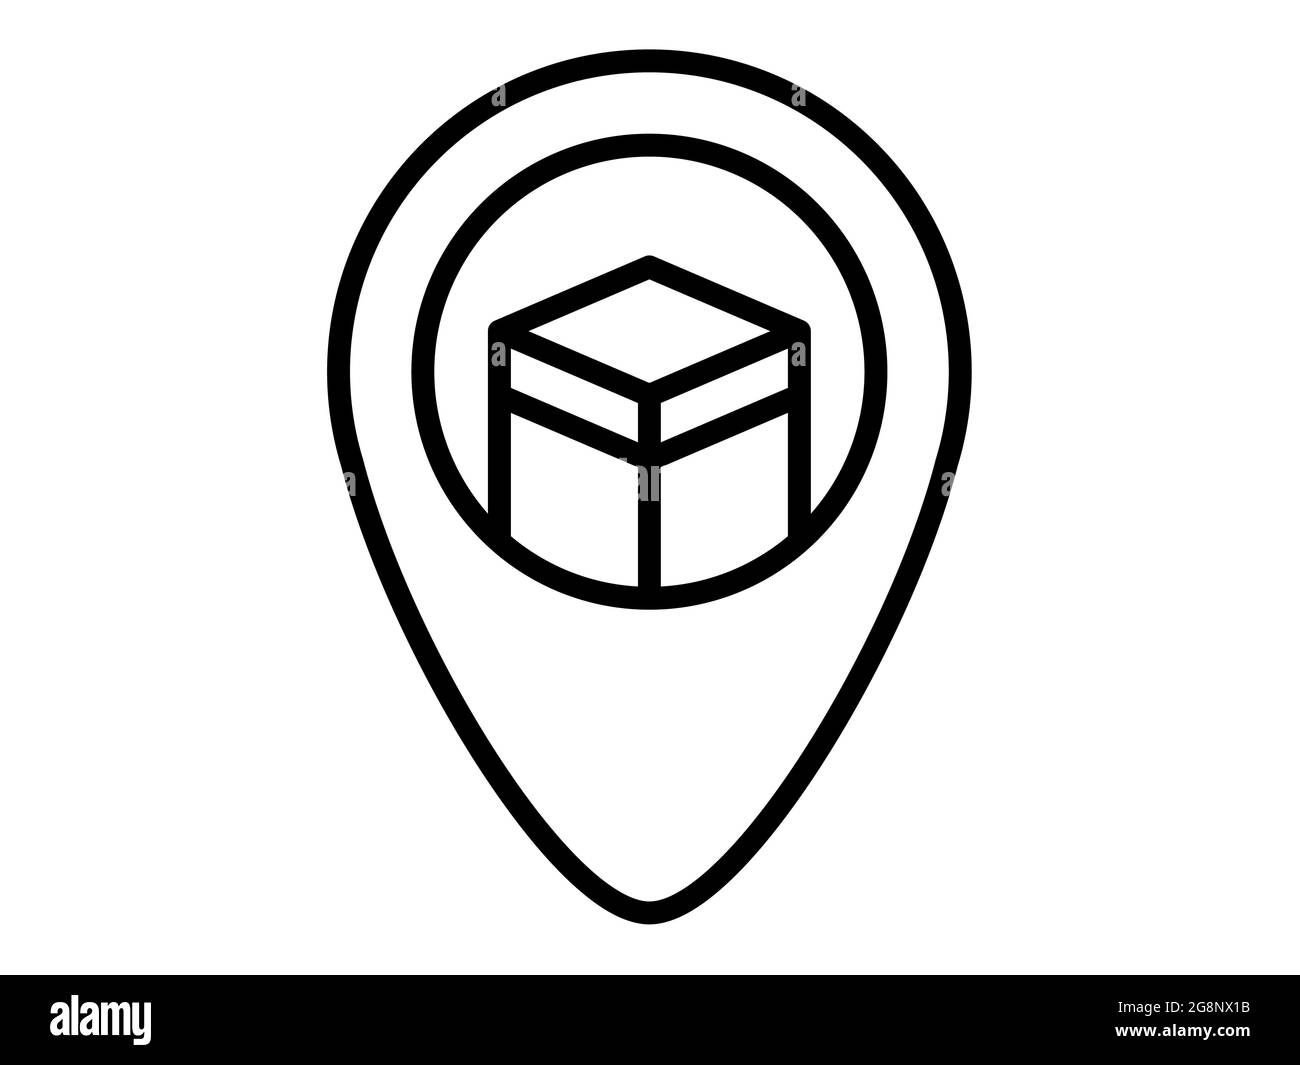 kaba mecca pin location single isolated icon with outline style vector illustration Stock Photo